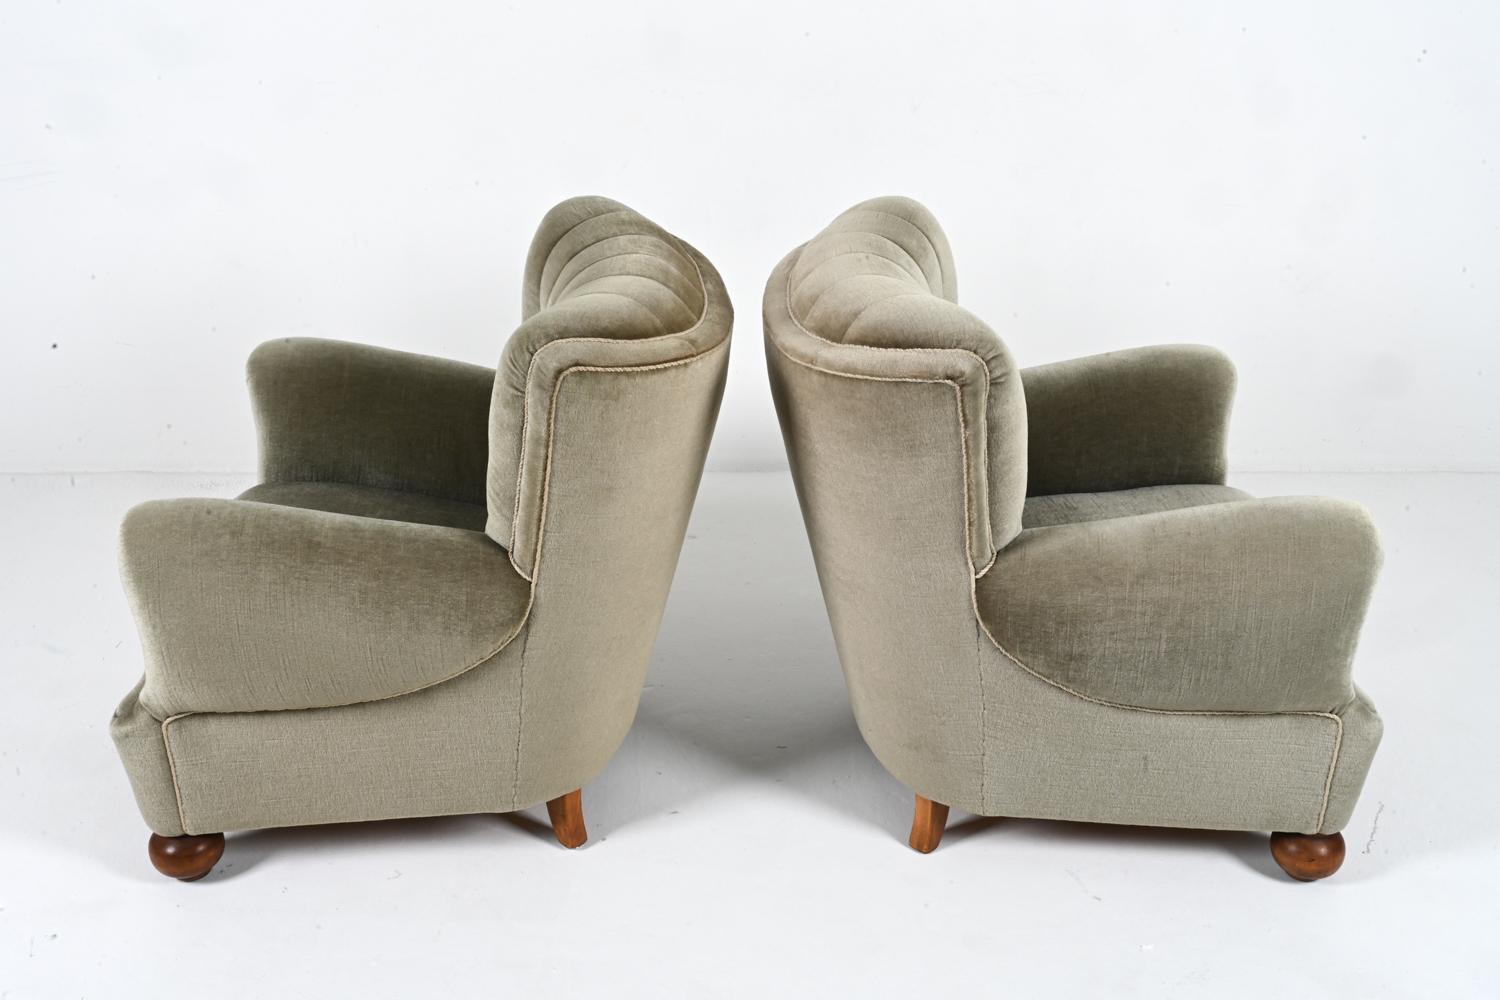 Pair of European Roll-Arm Club Chairs in Mohair and Beech, c. 1940's For Sale 6